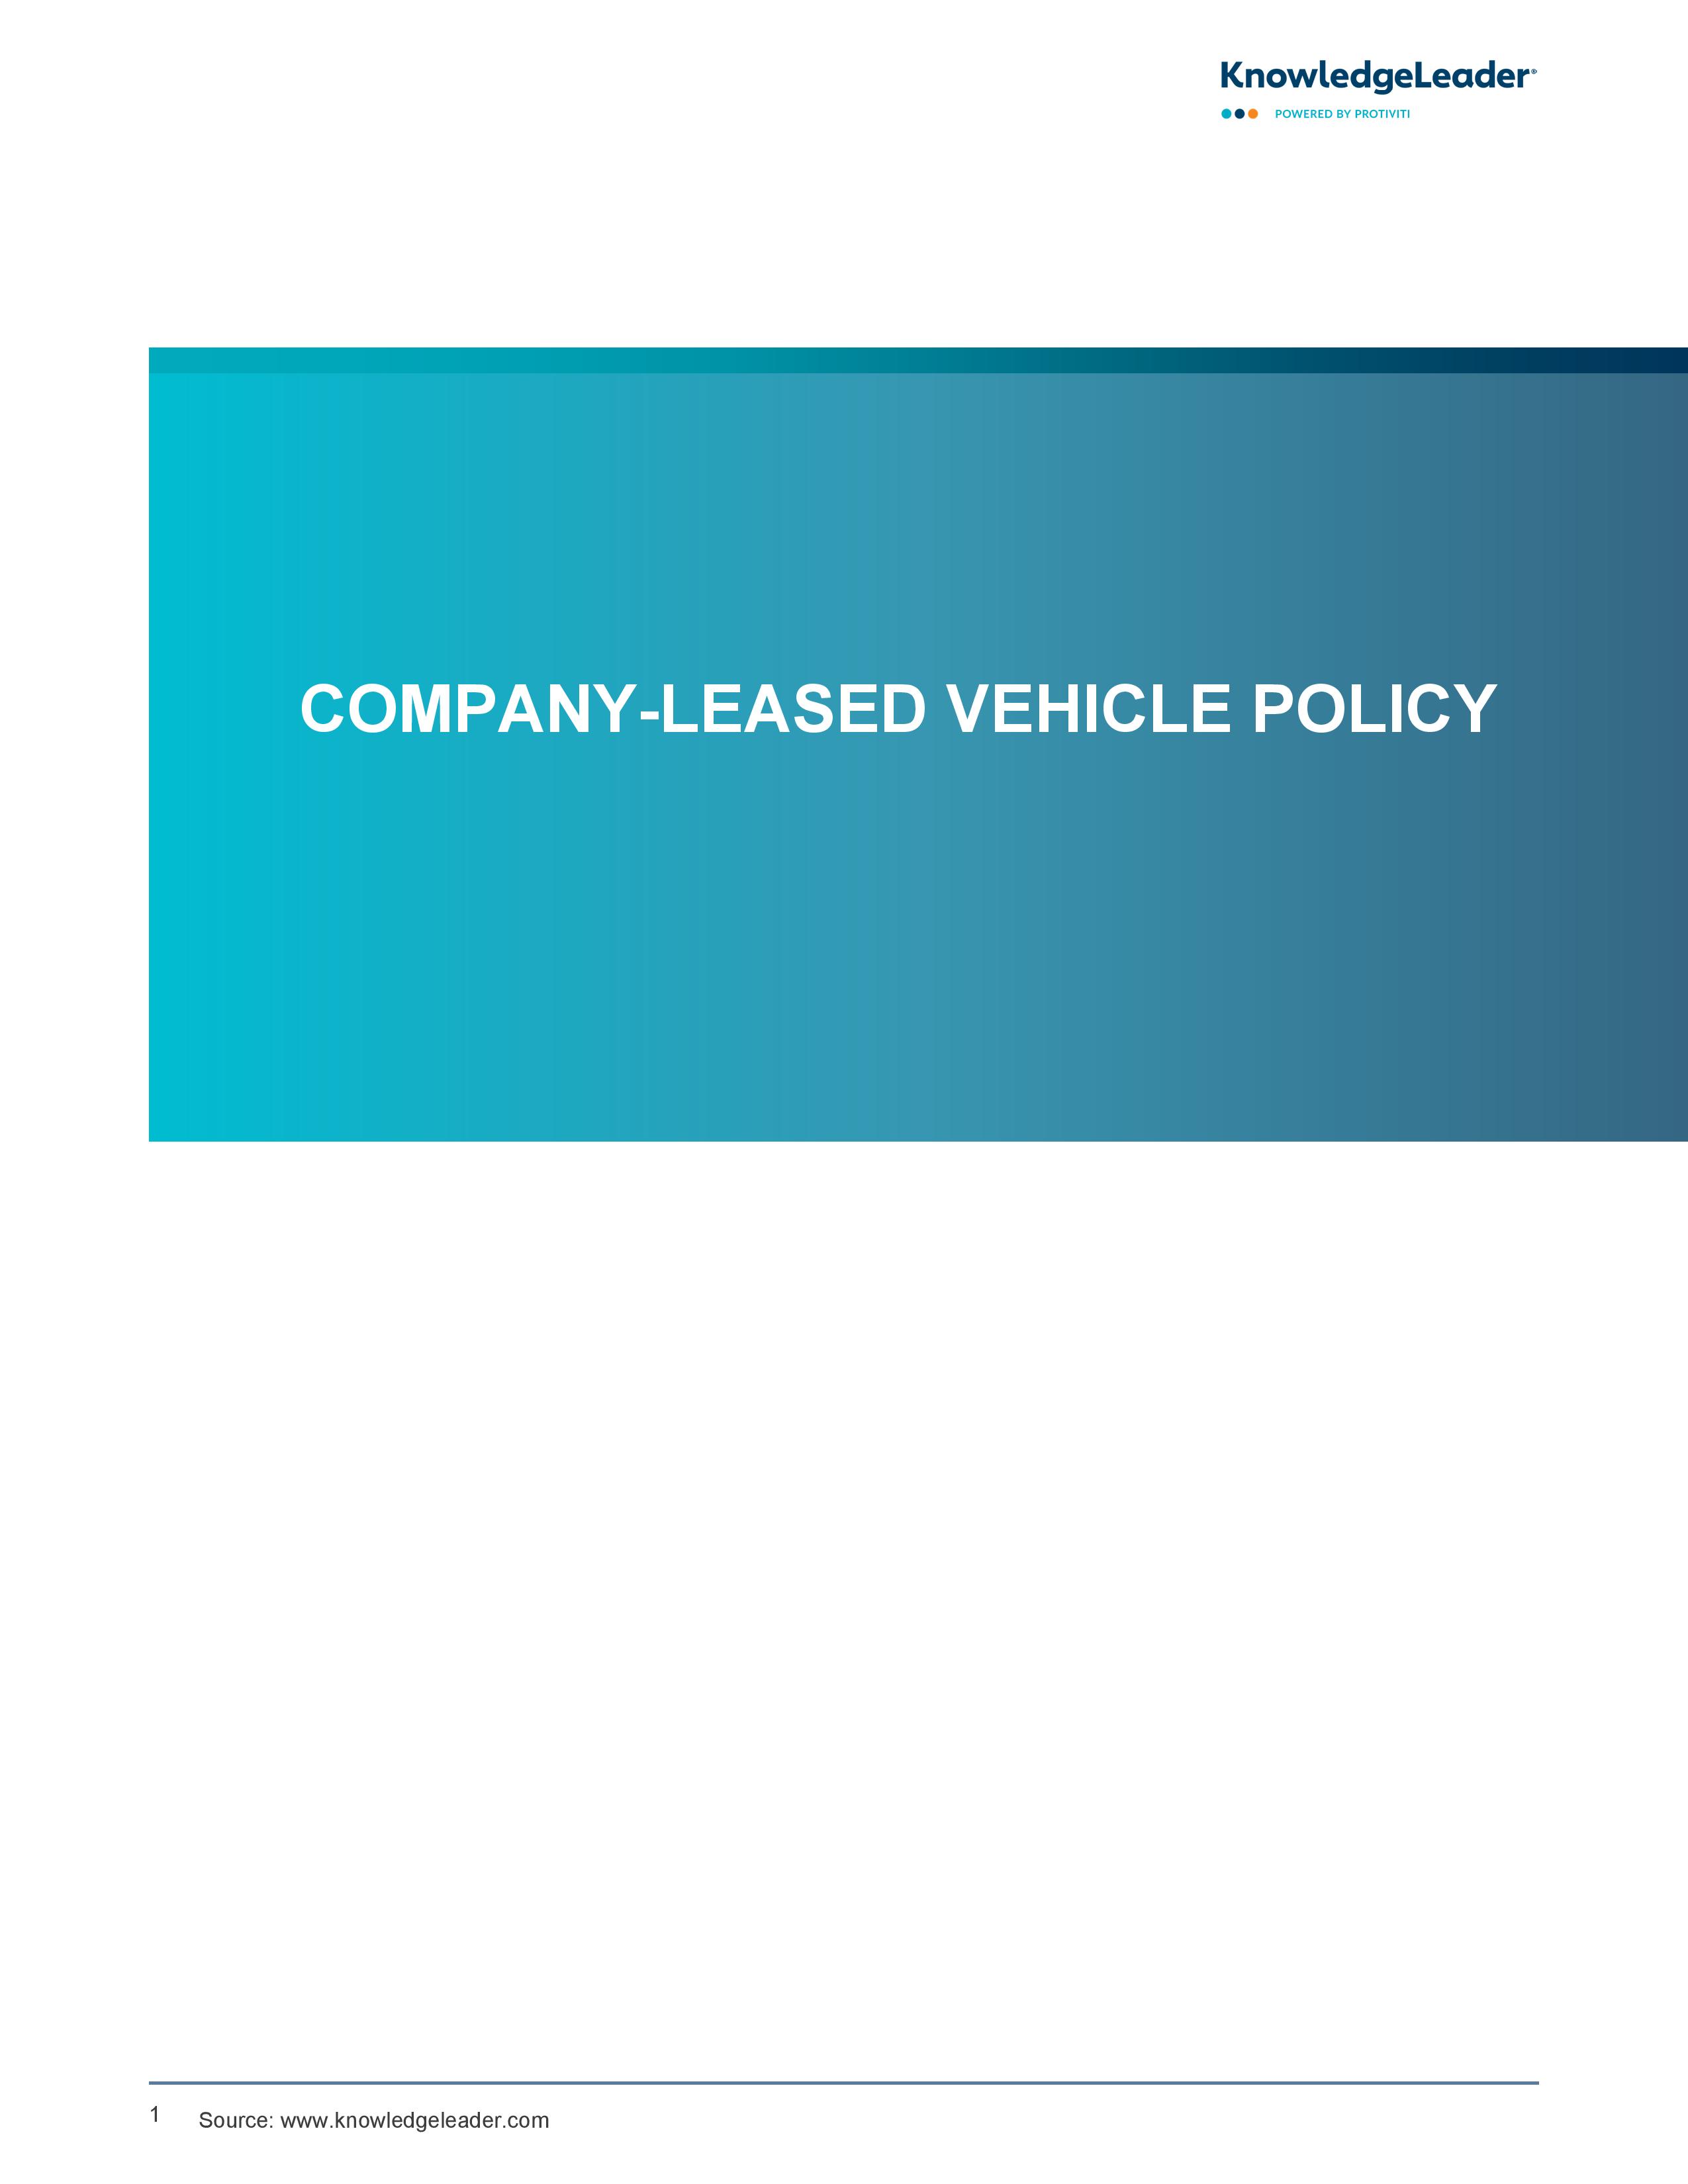 screenshot of the first page of Company-Leased Vehicle Policy